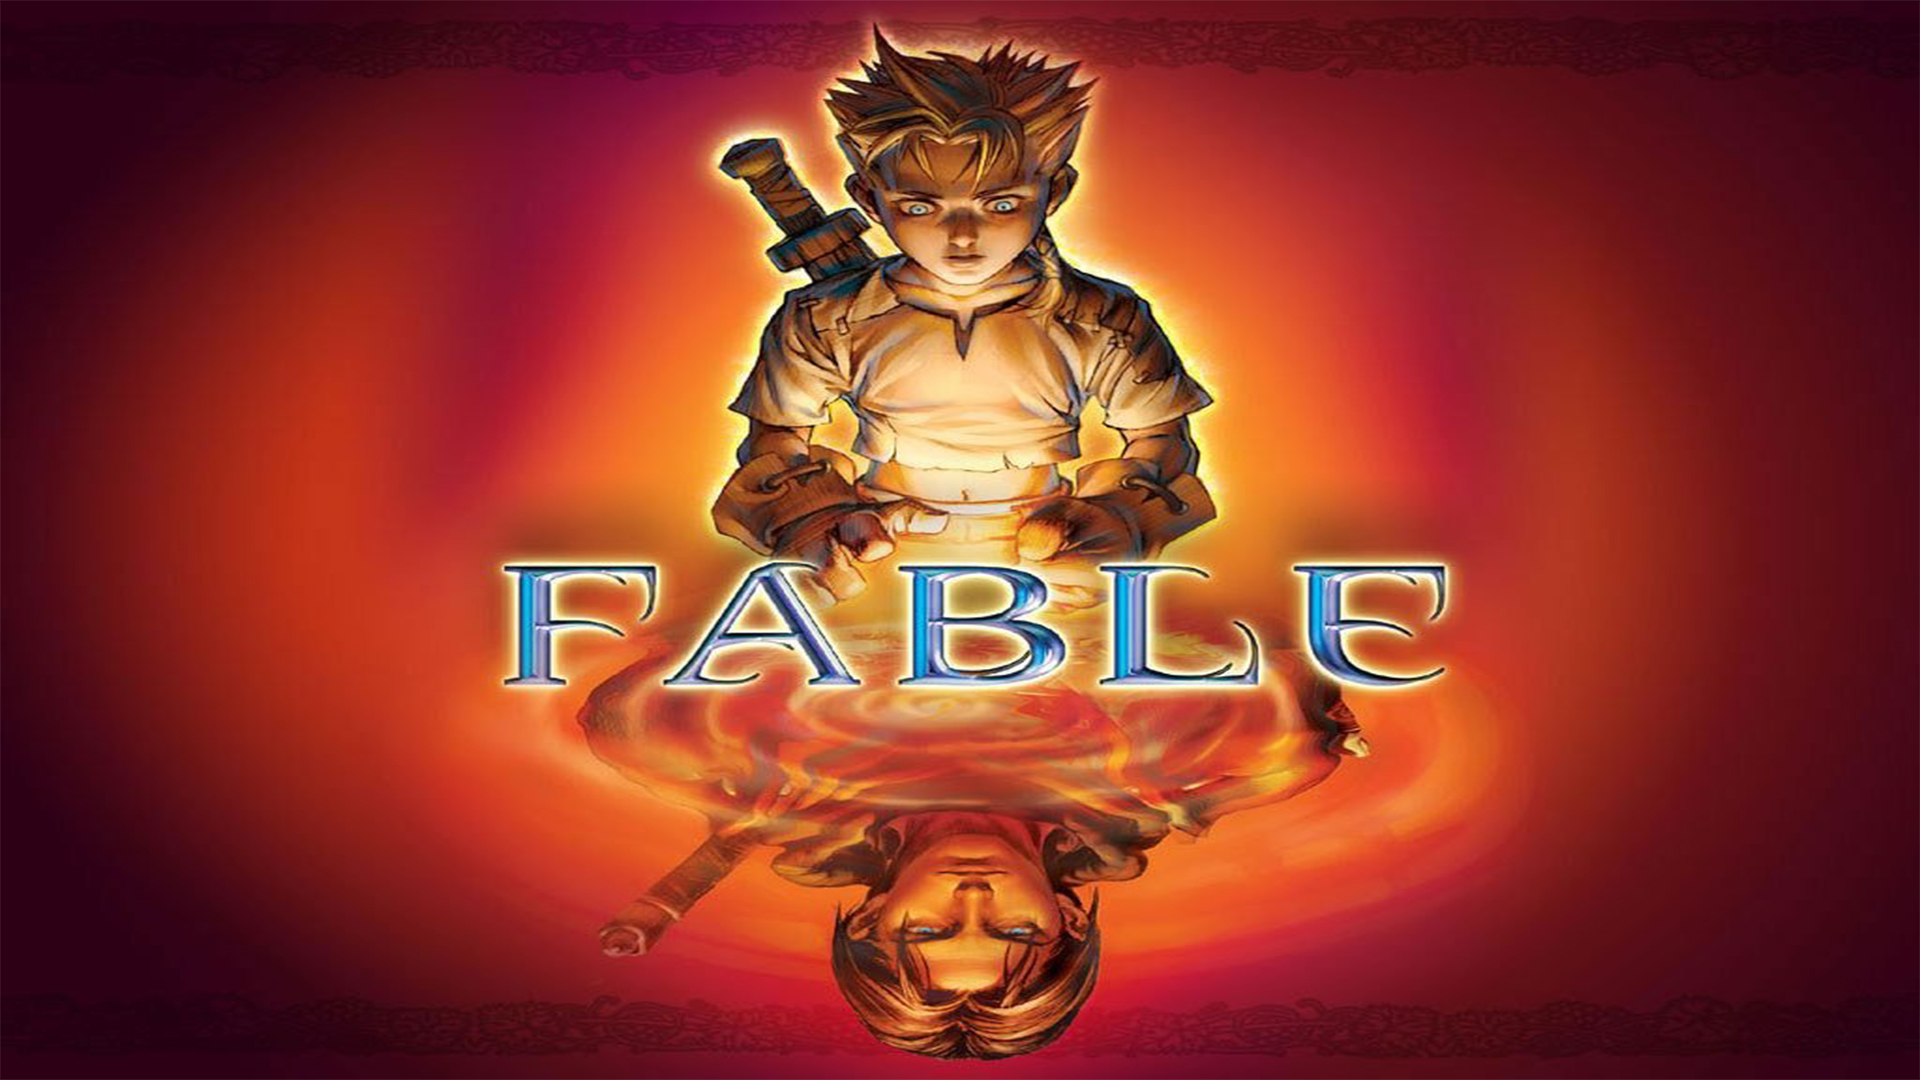 Fable Fable Wiki Fandom Powered By Wikia